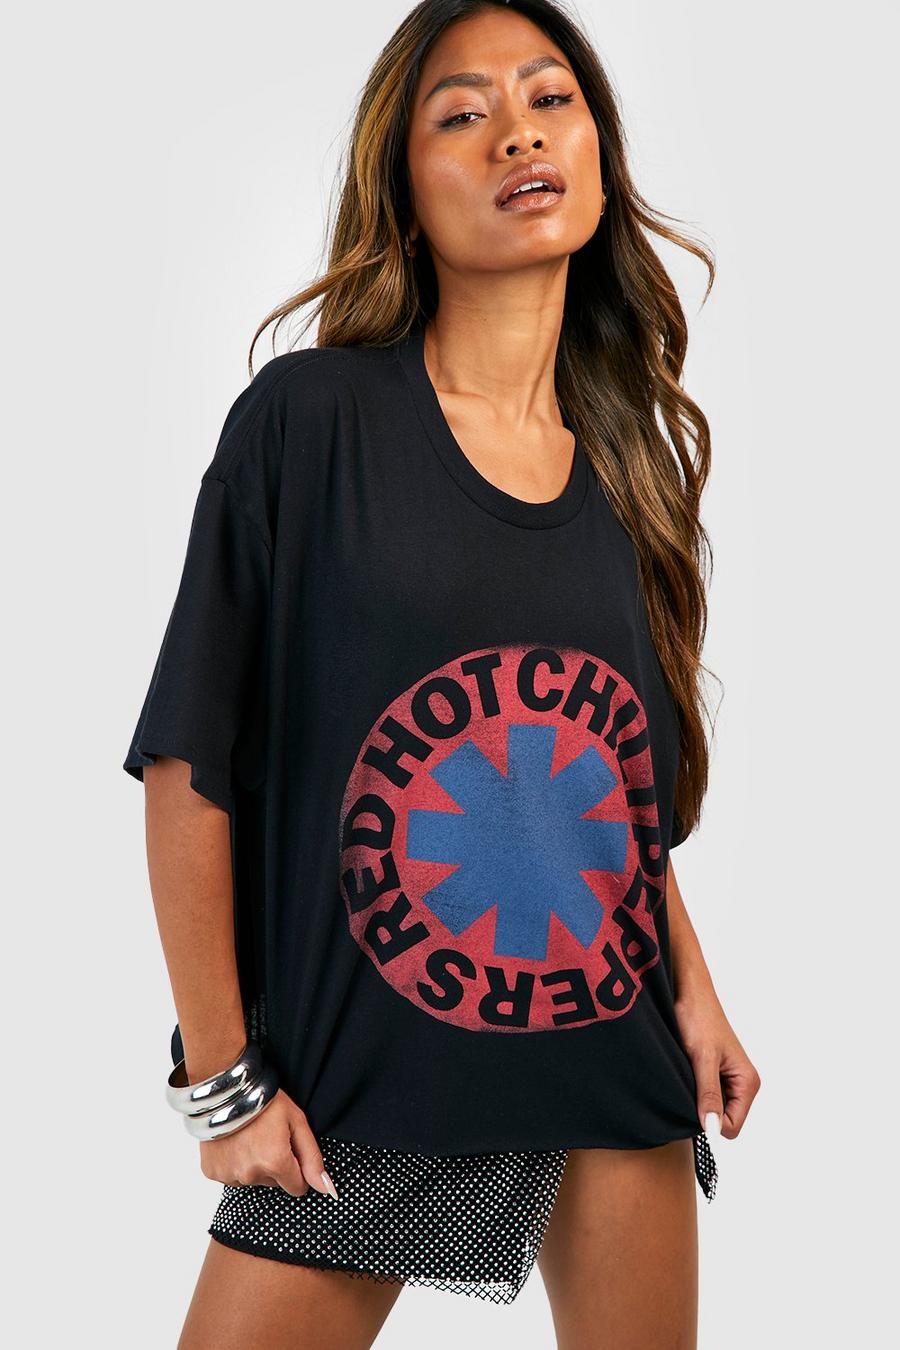 Red Hot Chili Peppers Cropped Band T-Shirt | boohoo